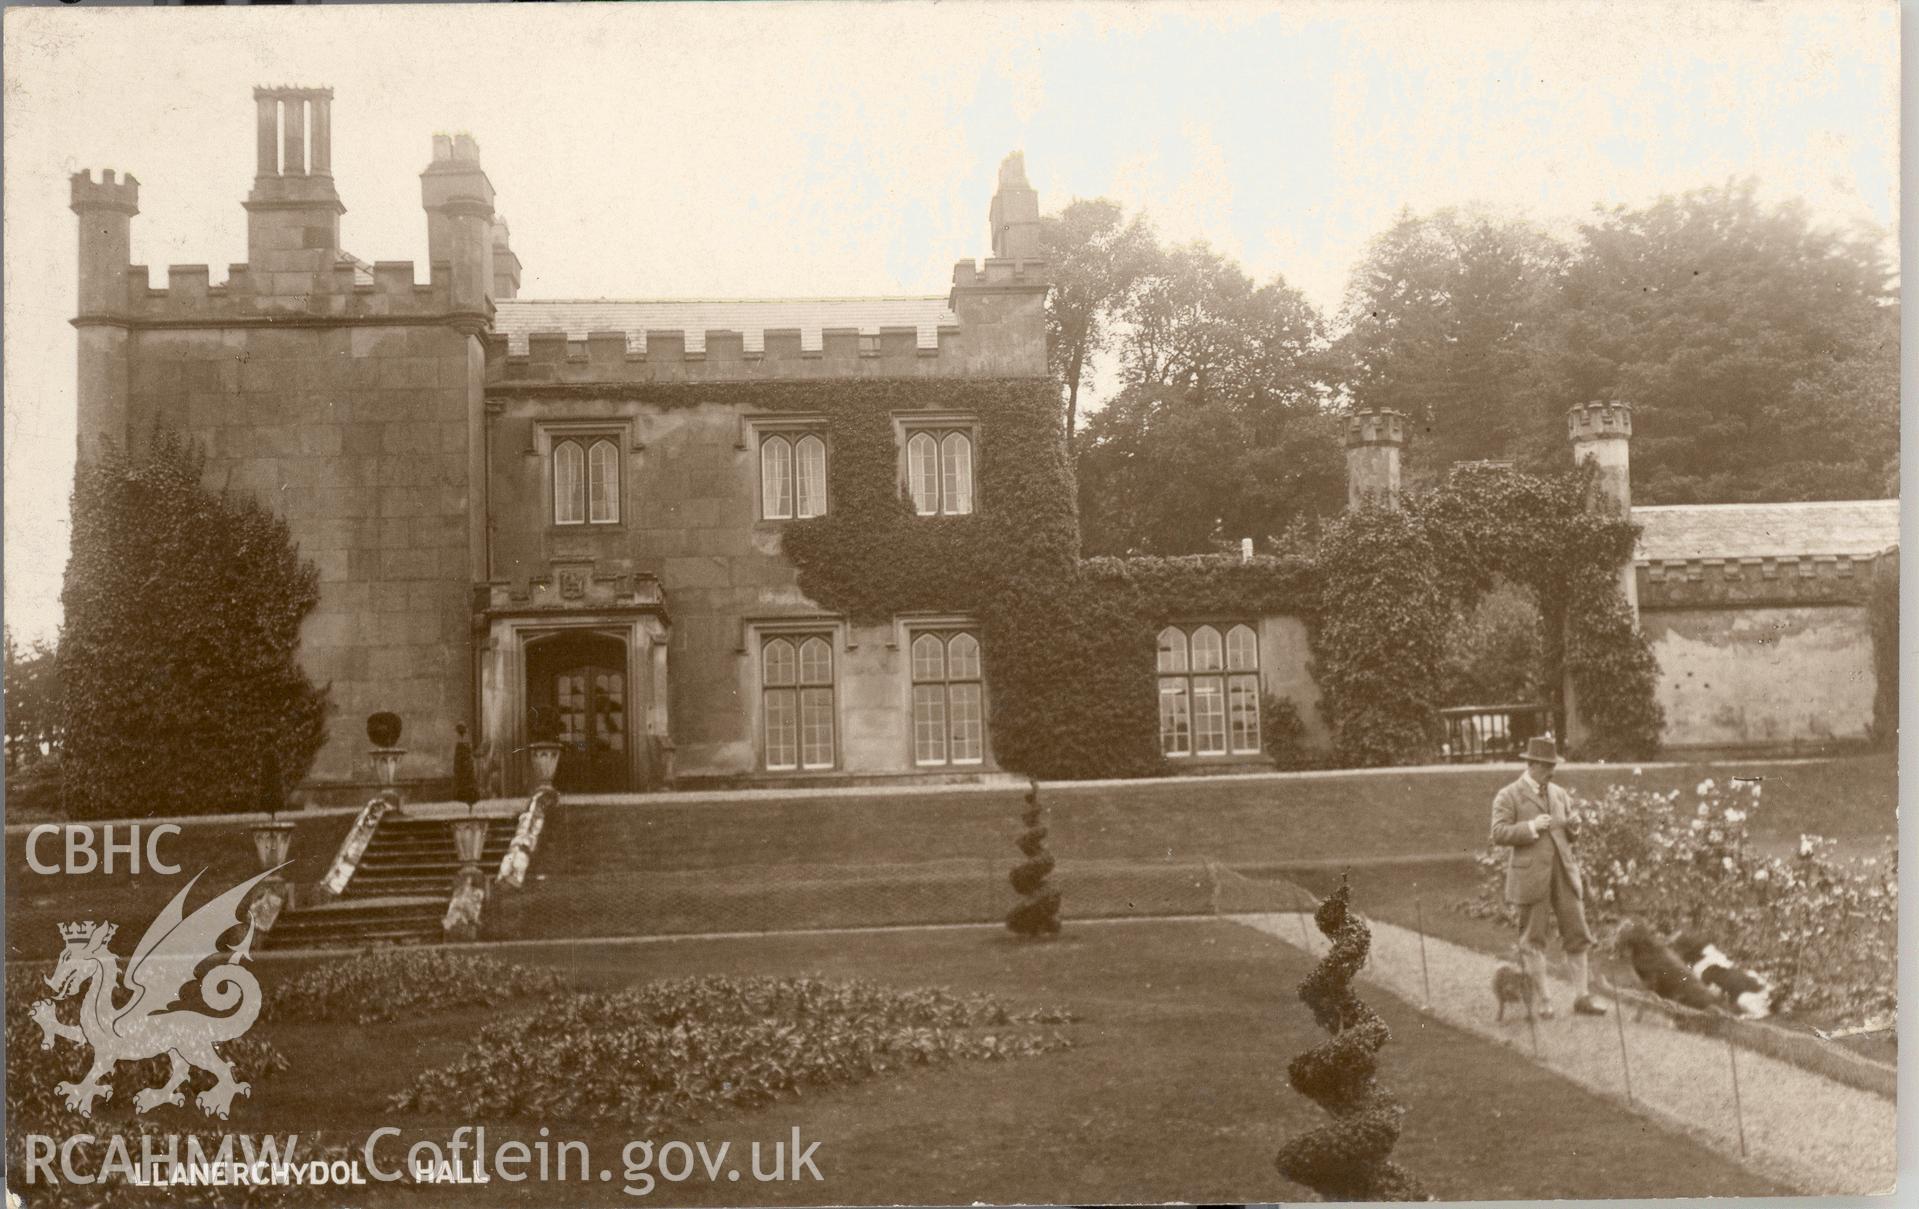 Digitised postcard image of Llanerchydol Hall, Welshpool, with figure. Produced by Parks and Gardens Data Services, from an original item in the Peter Davis Collection at Parks and Gardens UK. We hold only web-resolution images of this collection, suitable for viewing on screen and for research purposes only. We do not hold the original images, or publication quality scans.